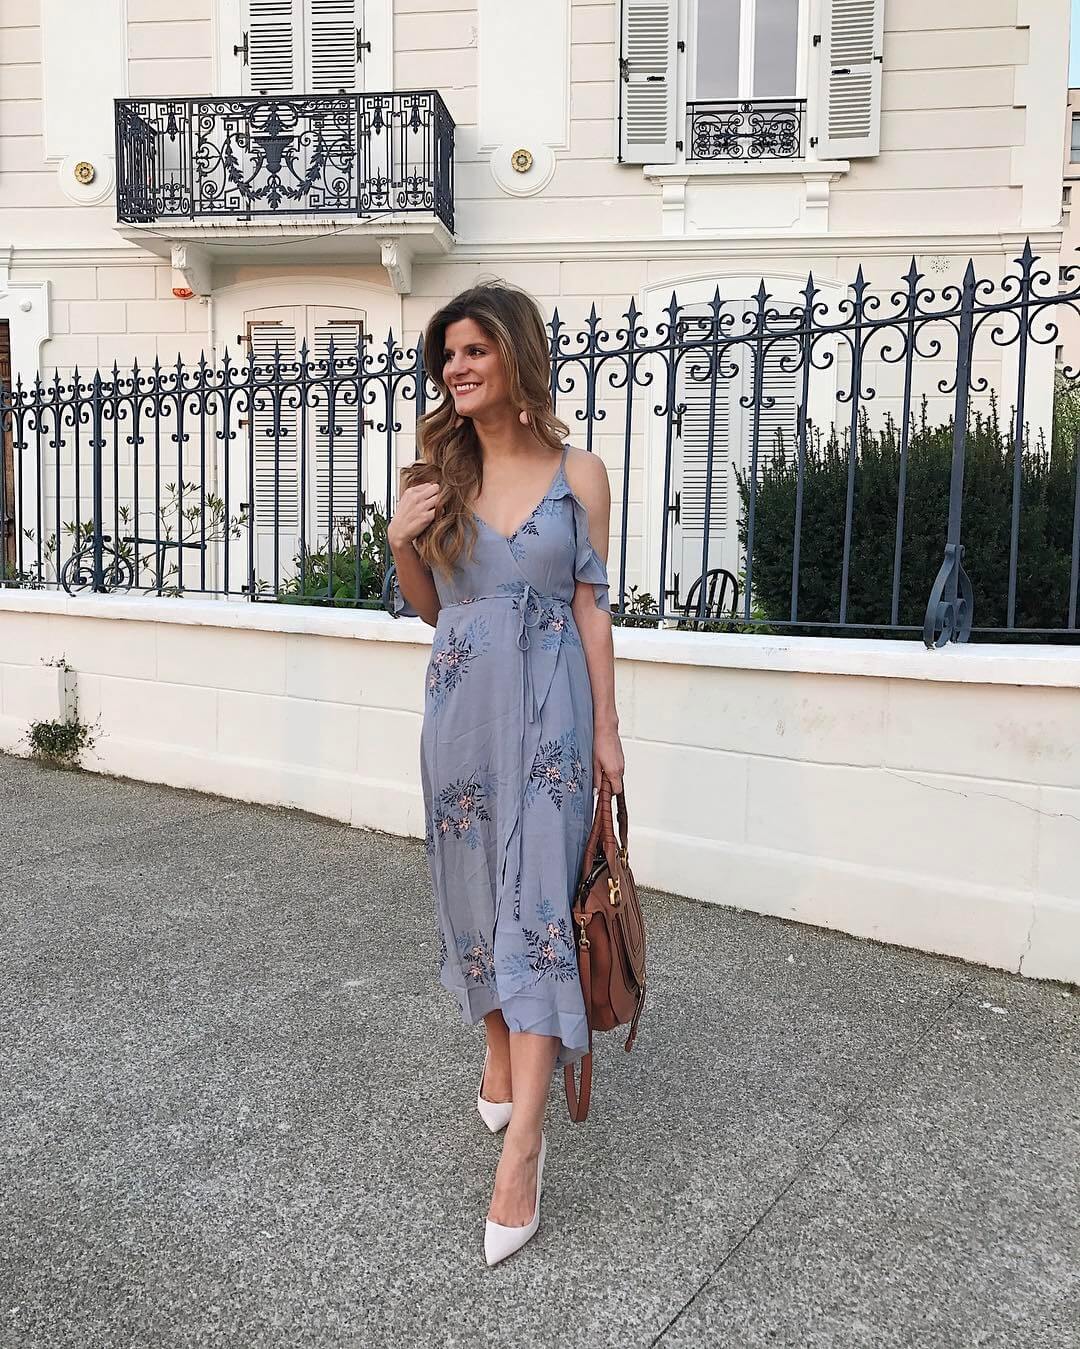 brighton the day styling floral maxi dress with dee keller pumps